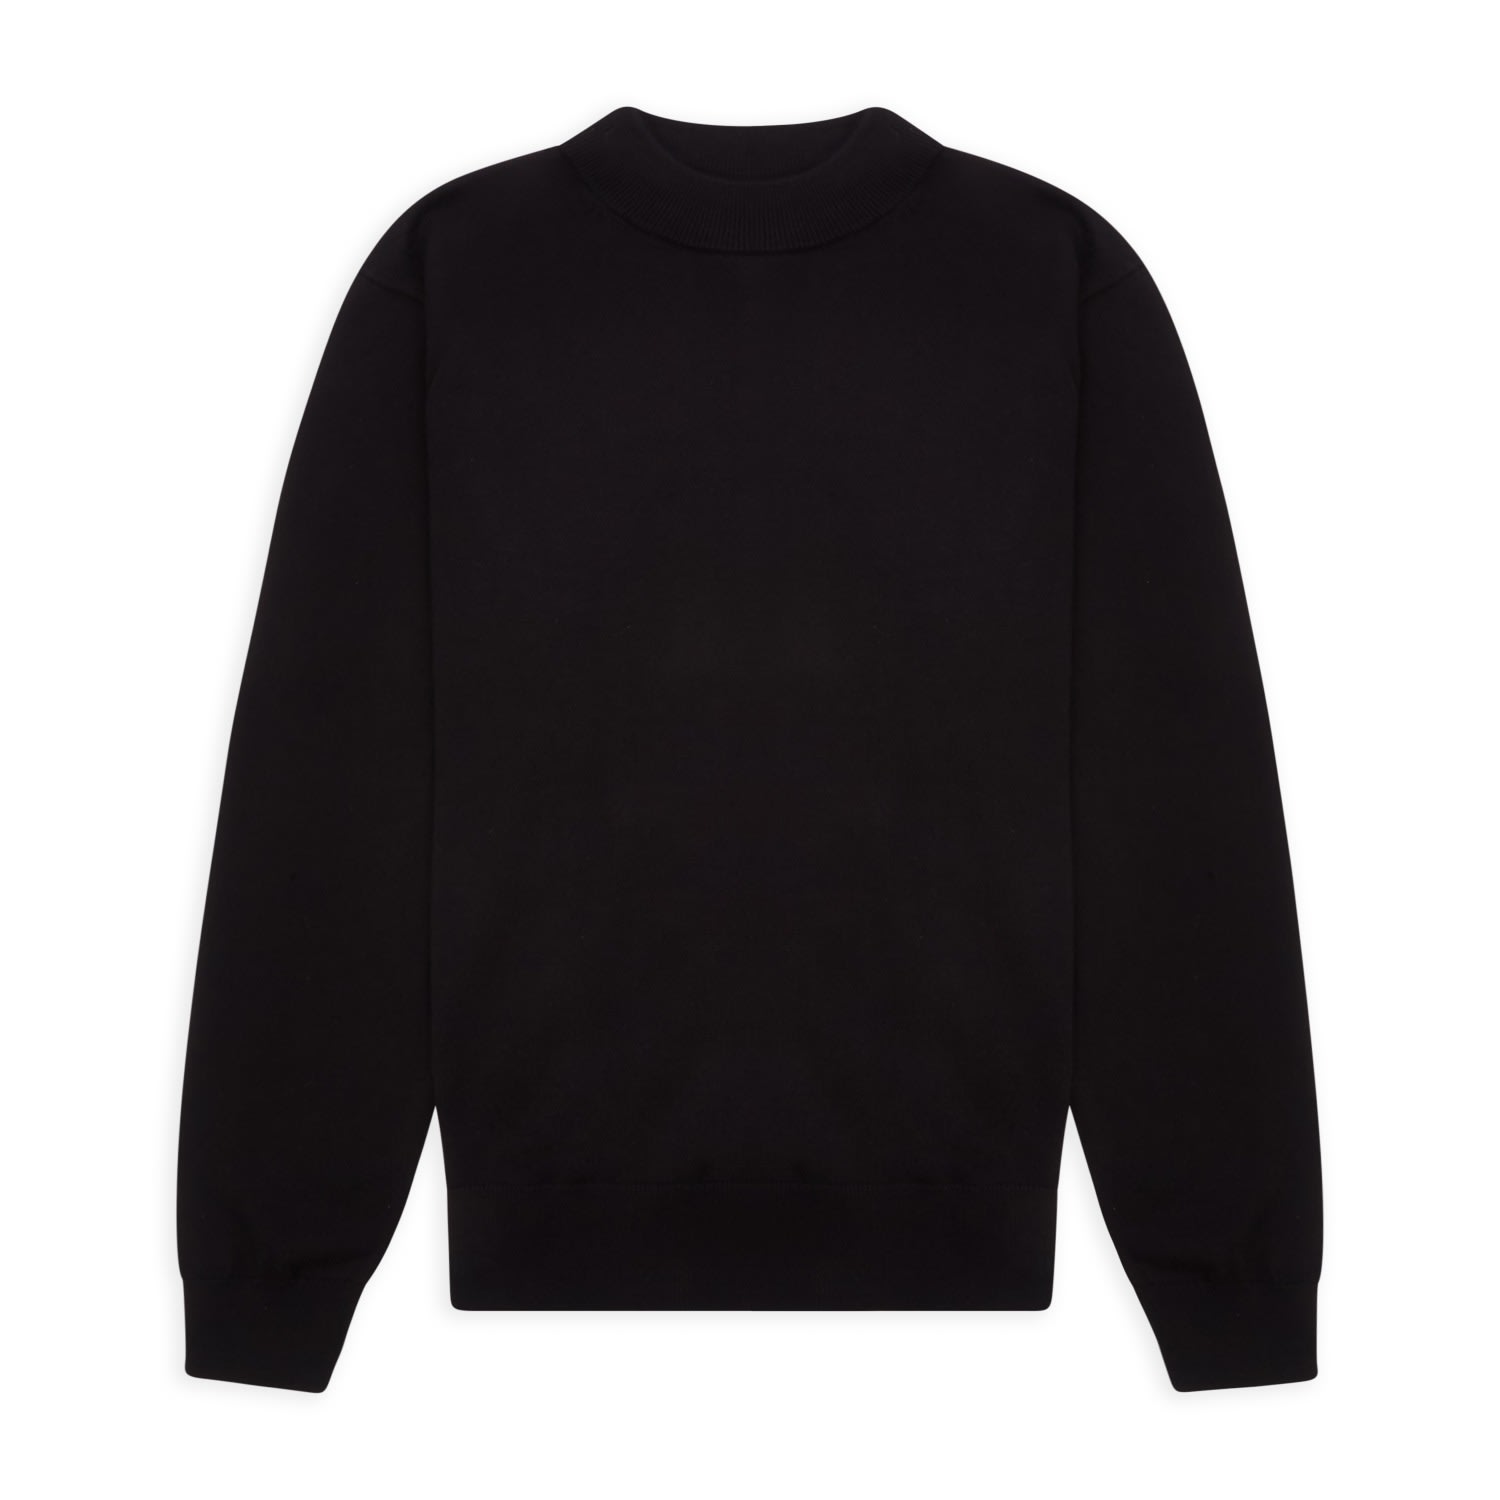 Burrows And Hare Men's Mock Turtle Neck - Black